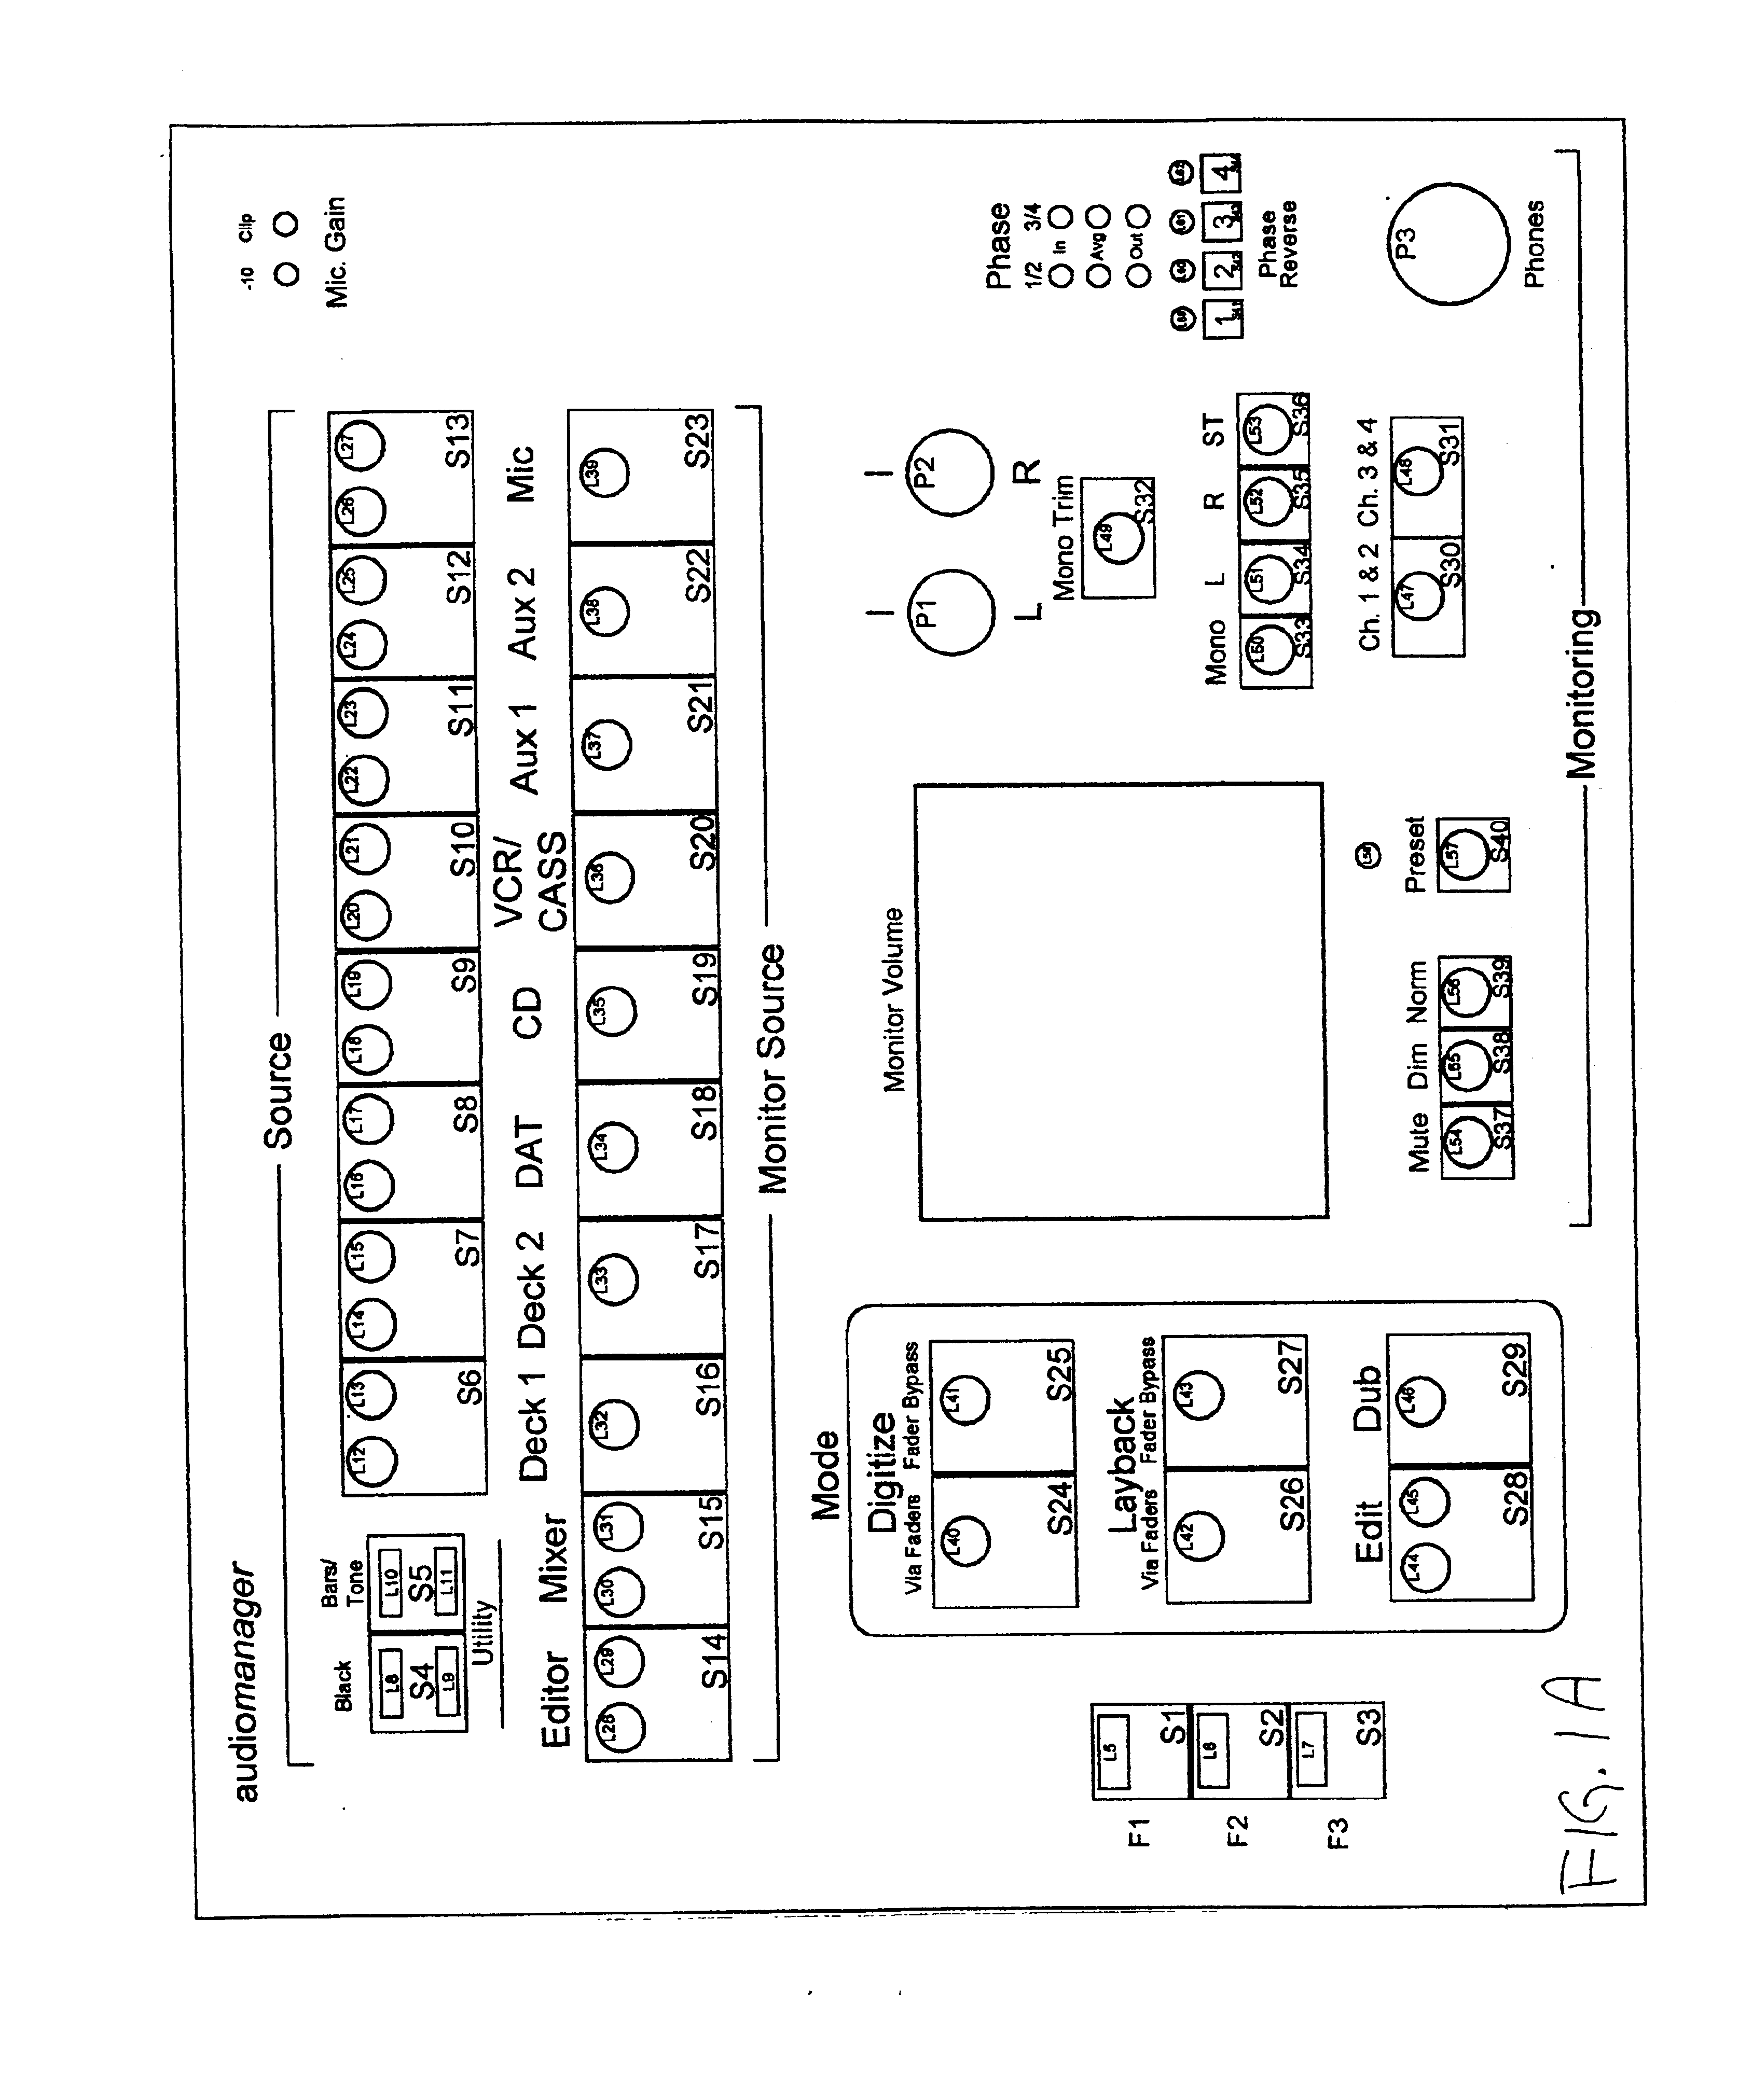 Control platform for multiple signal routing and interfacing in an audio/visual environment